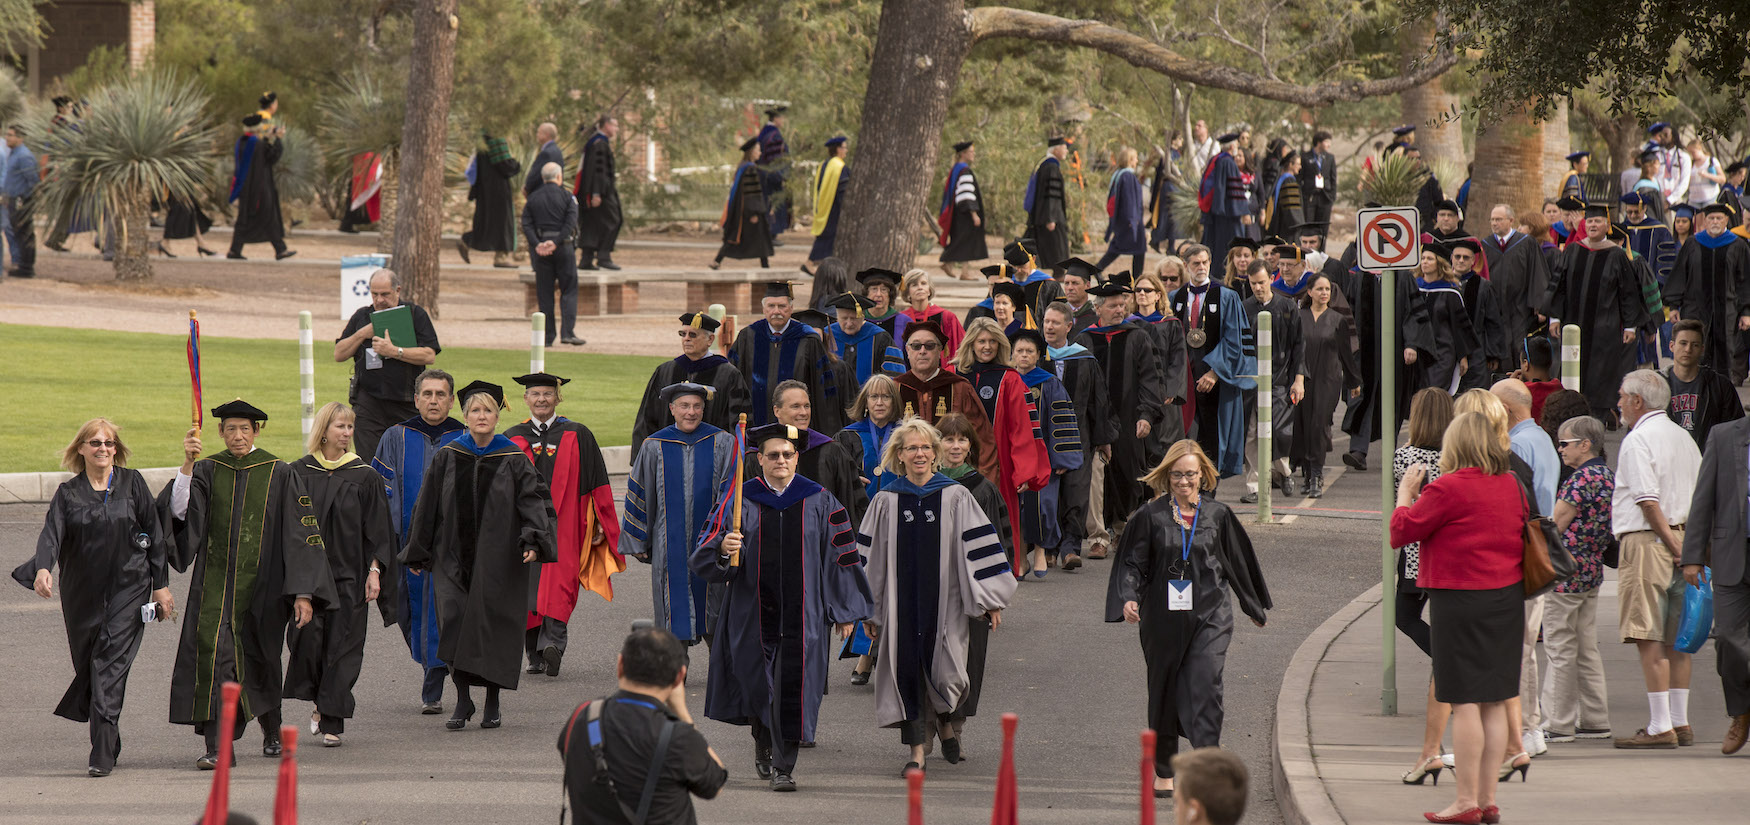 The formal procession heads from Old Main